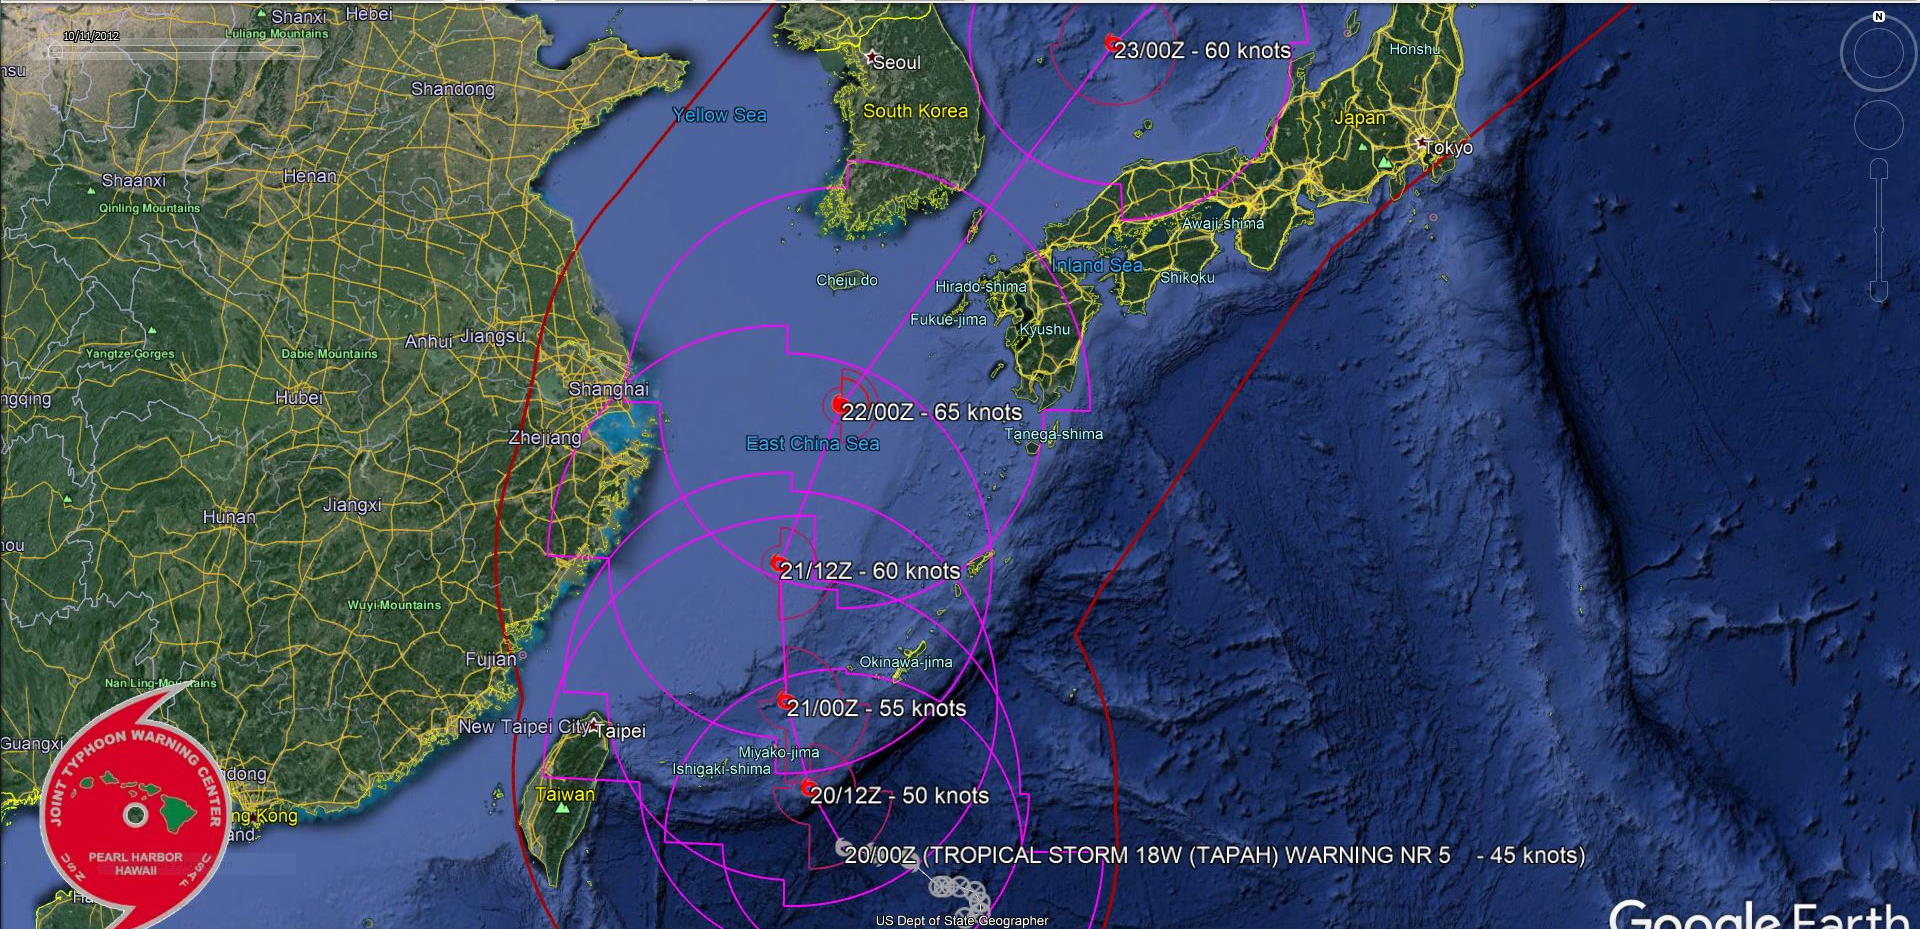 Tapah(18W) intensifying, typhoon intensity forecast in 48h south of Jeju